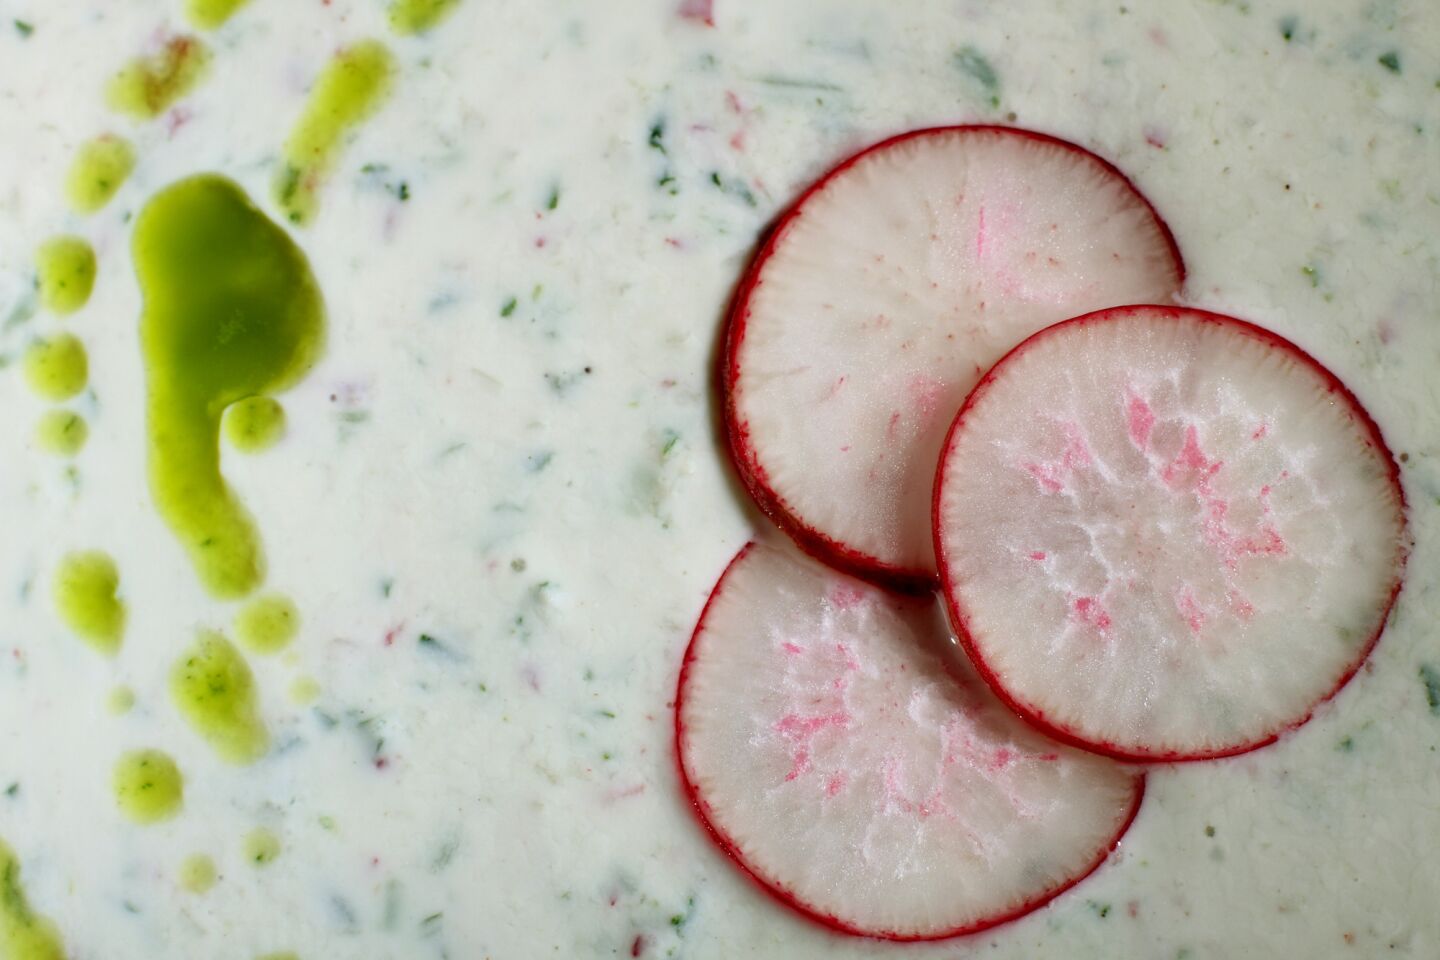 Buttermilk soup with a drizzle of green oil and radish slices hits the spot when the mercury soars.